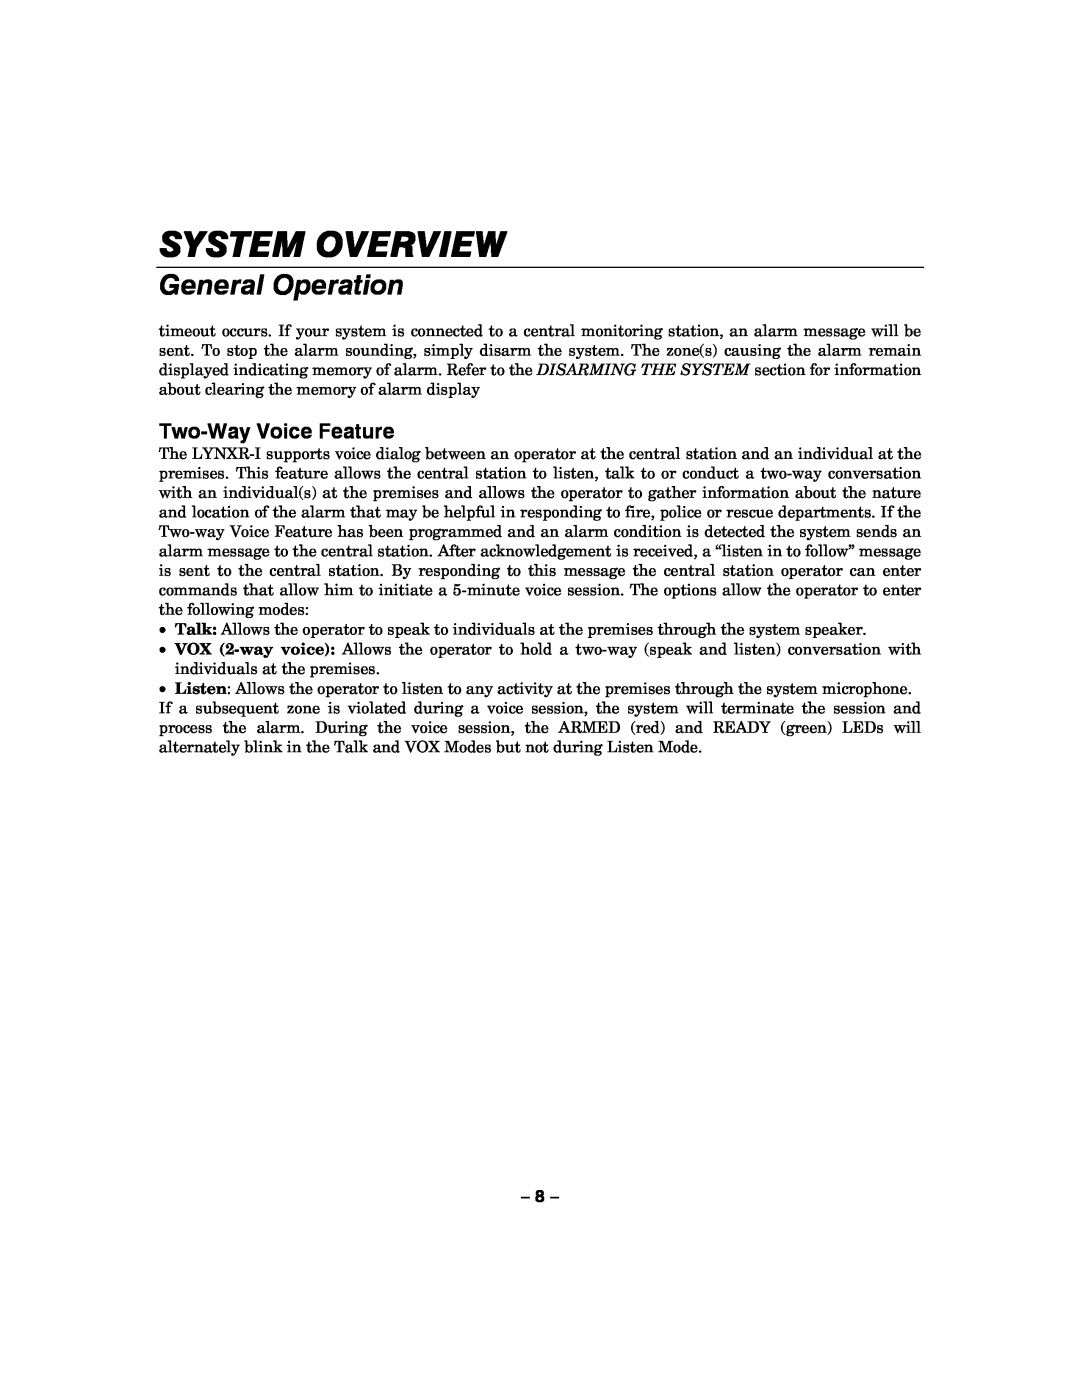 Honeywell LYNXR-I manual General Operation, Two-WayVoice Feature, System Overview 